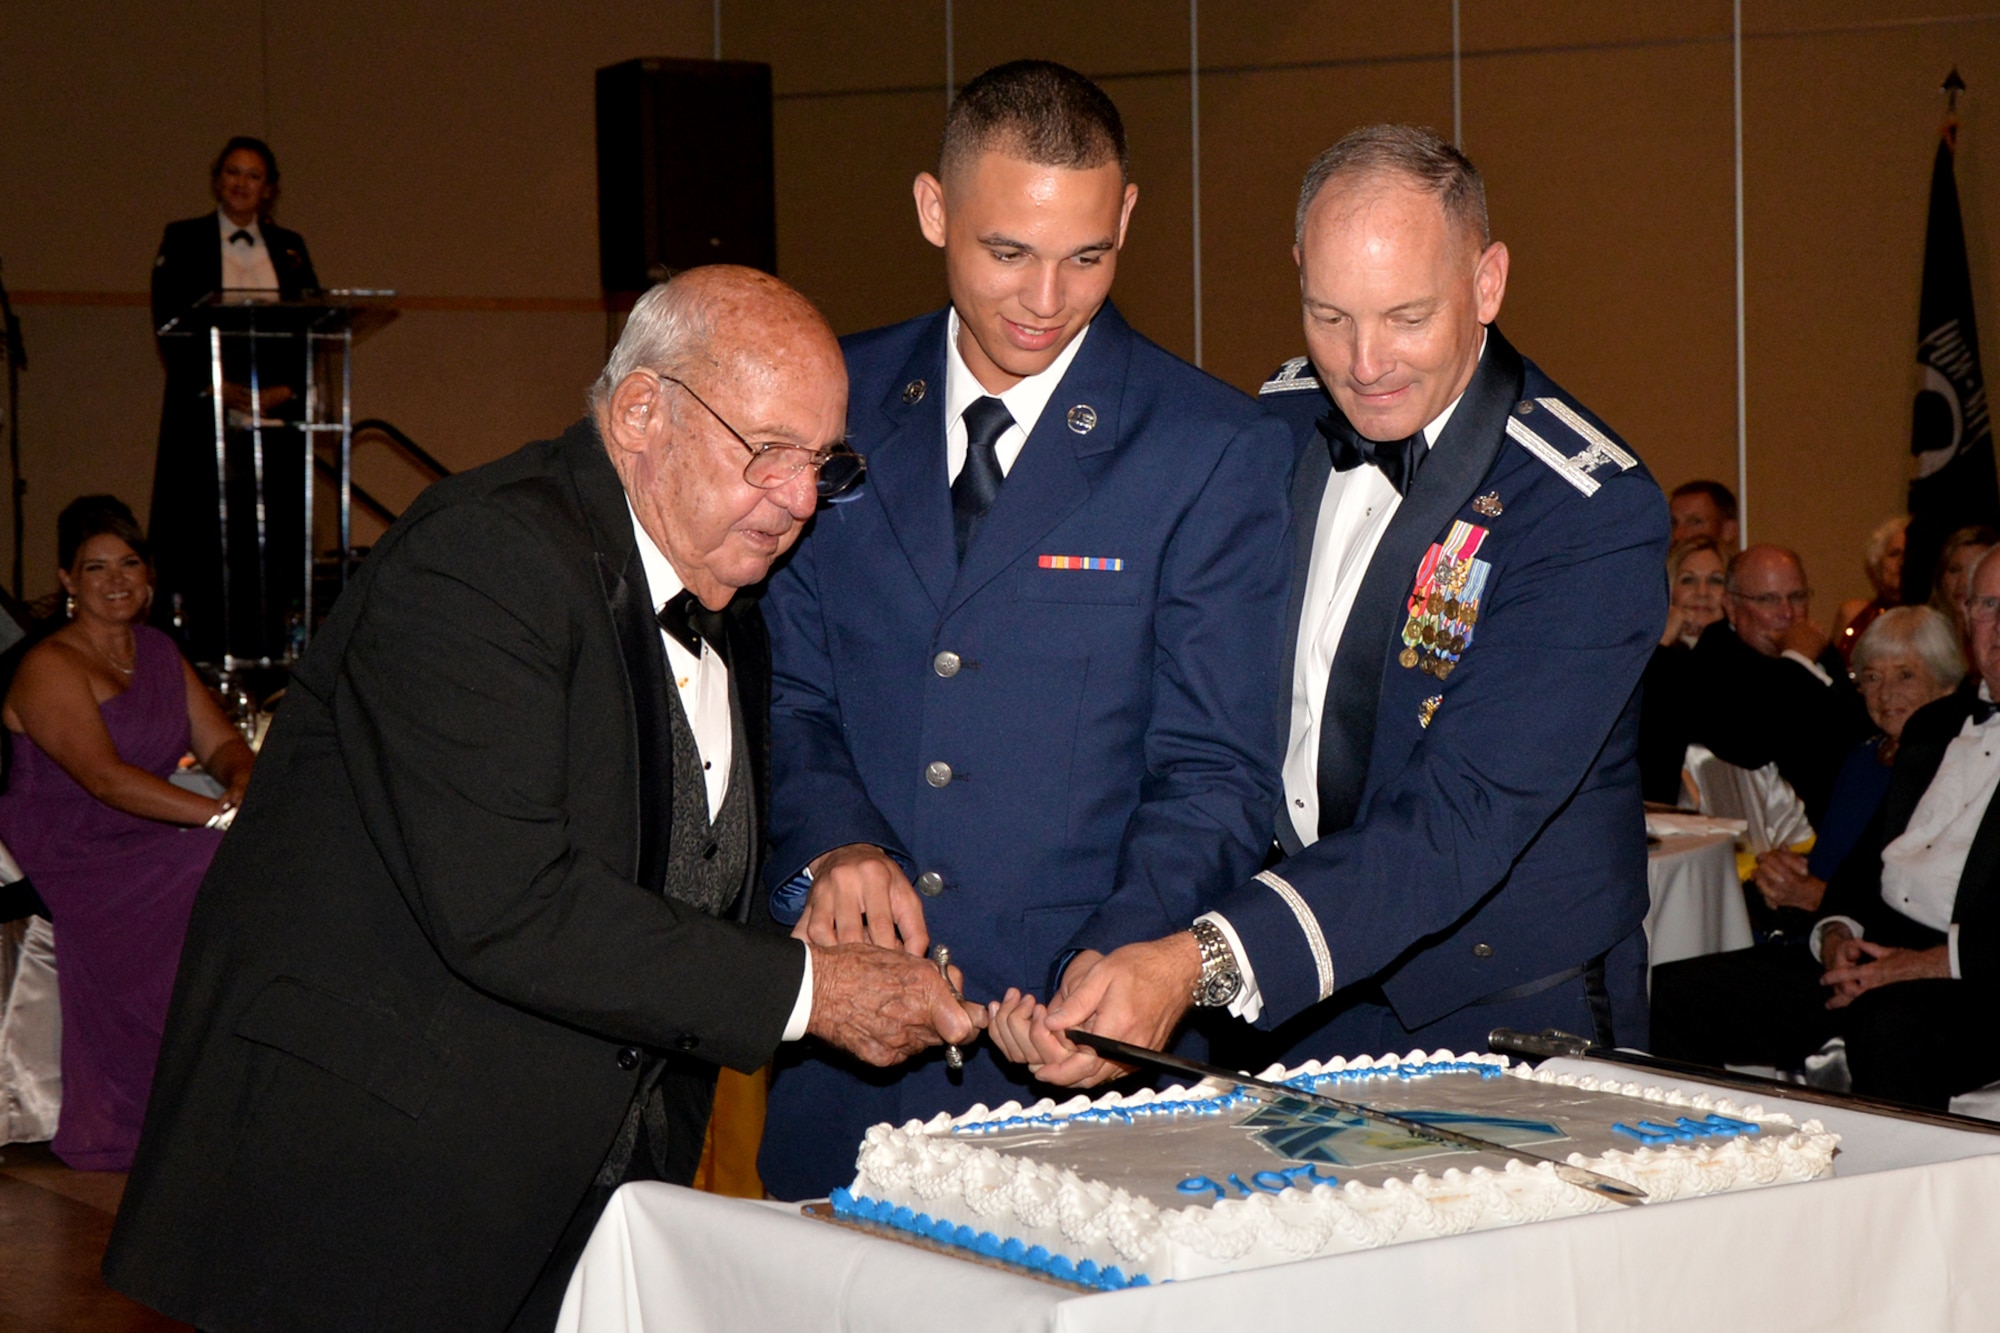 U.S. Air Force retired Col. Charles Powell, Airman Alex Bridgewater, 312th Training Squadron student, and Col. Michael Downs, 17th Training Wing Commander, cut a cake in celebration of the U.S. Air Force’s 69th birthday during Goodfellow Air Force Base’s Annual Air Force Ball at the McNease Convention Center in San Angelo, Texas, Sept. 16, 2016. It is a long-held tradition that the birthday cake is cut by the most senior member or veteran and youngest member present. (U.S. Air Force photo by Airman 1st Class Randall Moose/Released)